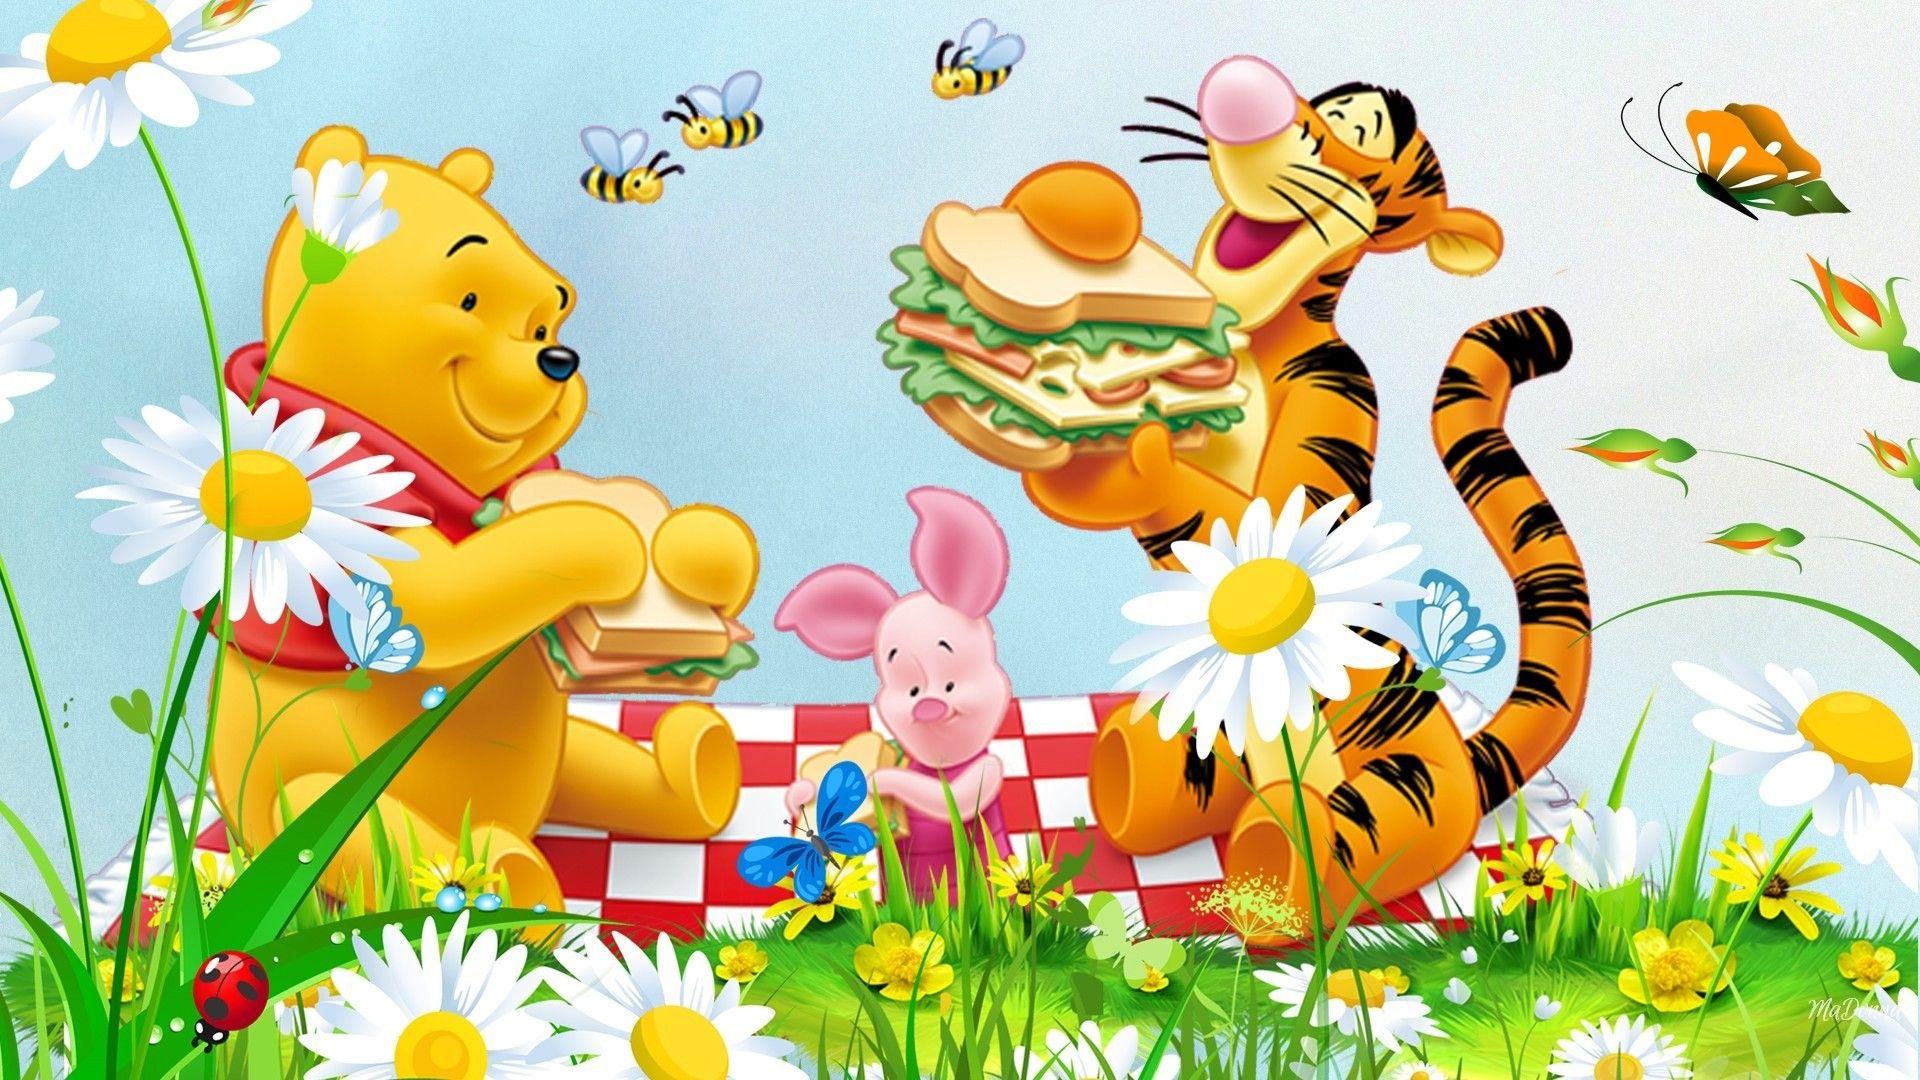 Picnic Flowers Grass Bee Winnie The Pooh Tigger And Piglet Cartoon